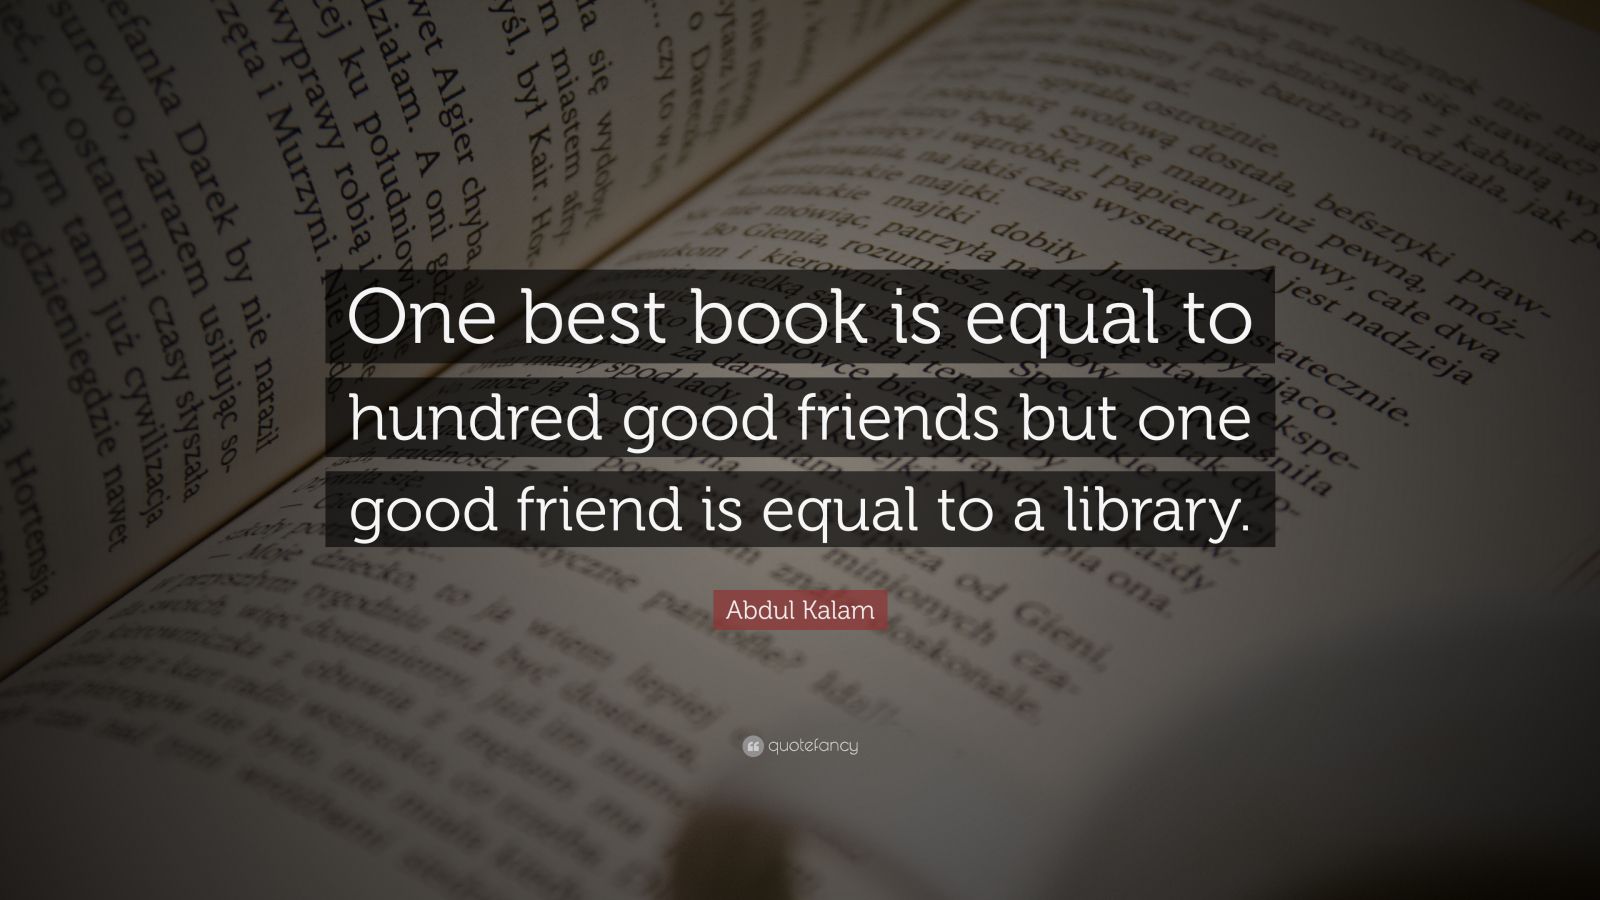 Abdul Kalam Quote One Best Book Is Equal To Hundred Good Friends But One Good Friend Is Equal